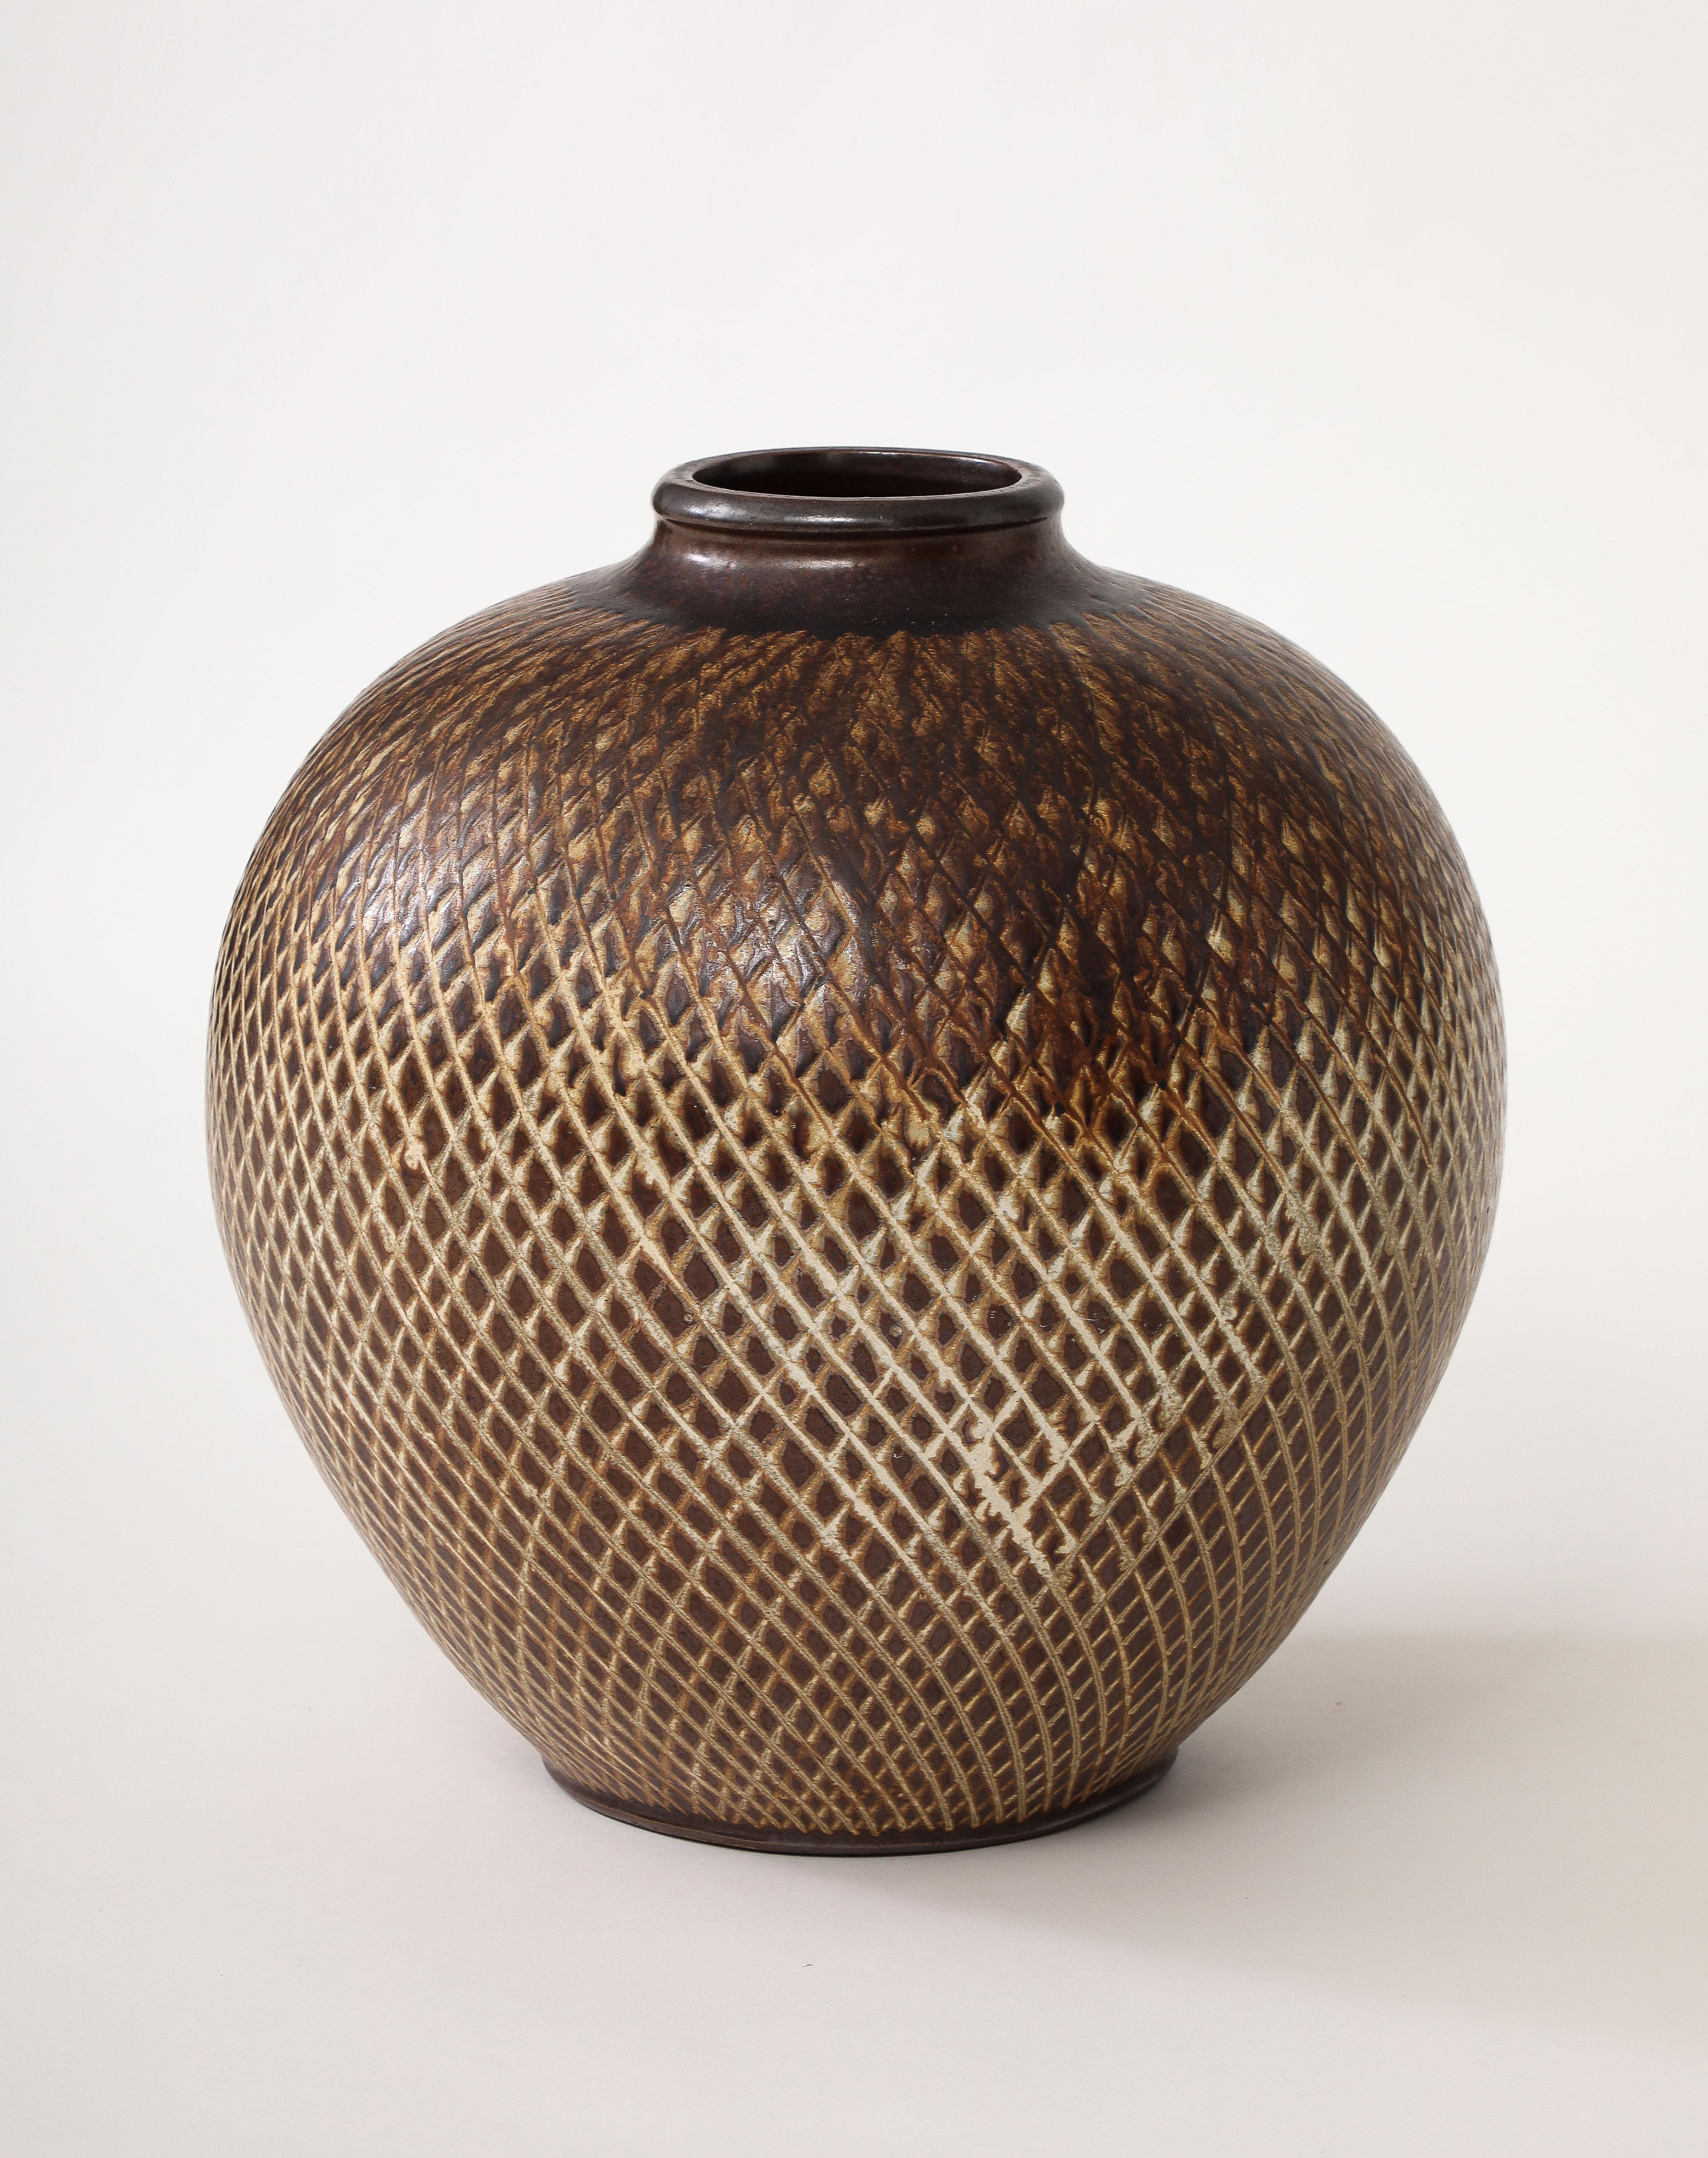 Large Arthur Andersson Stoneware Floor Vase by Wallåkra, Sweden, 1950, signed In Good Condition For Sale In Brooklyn, NY